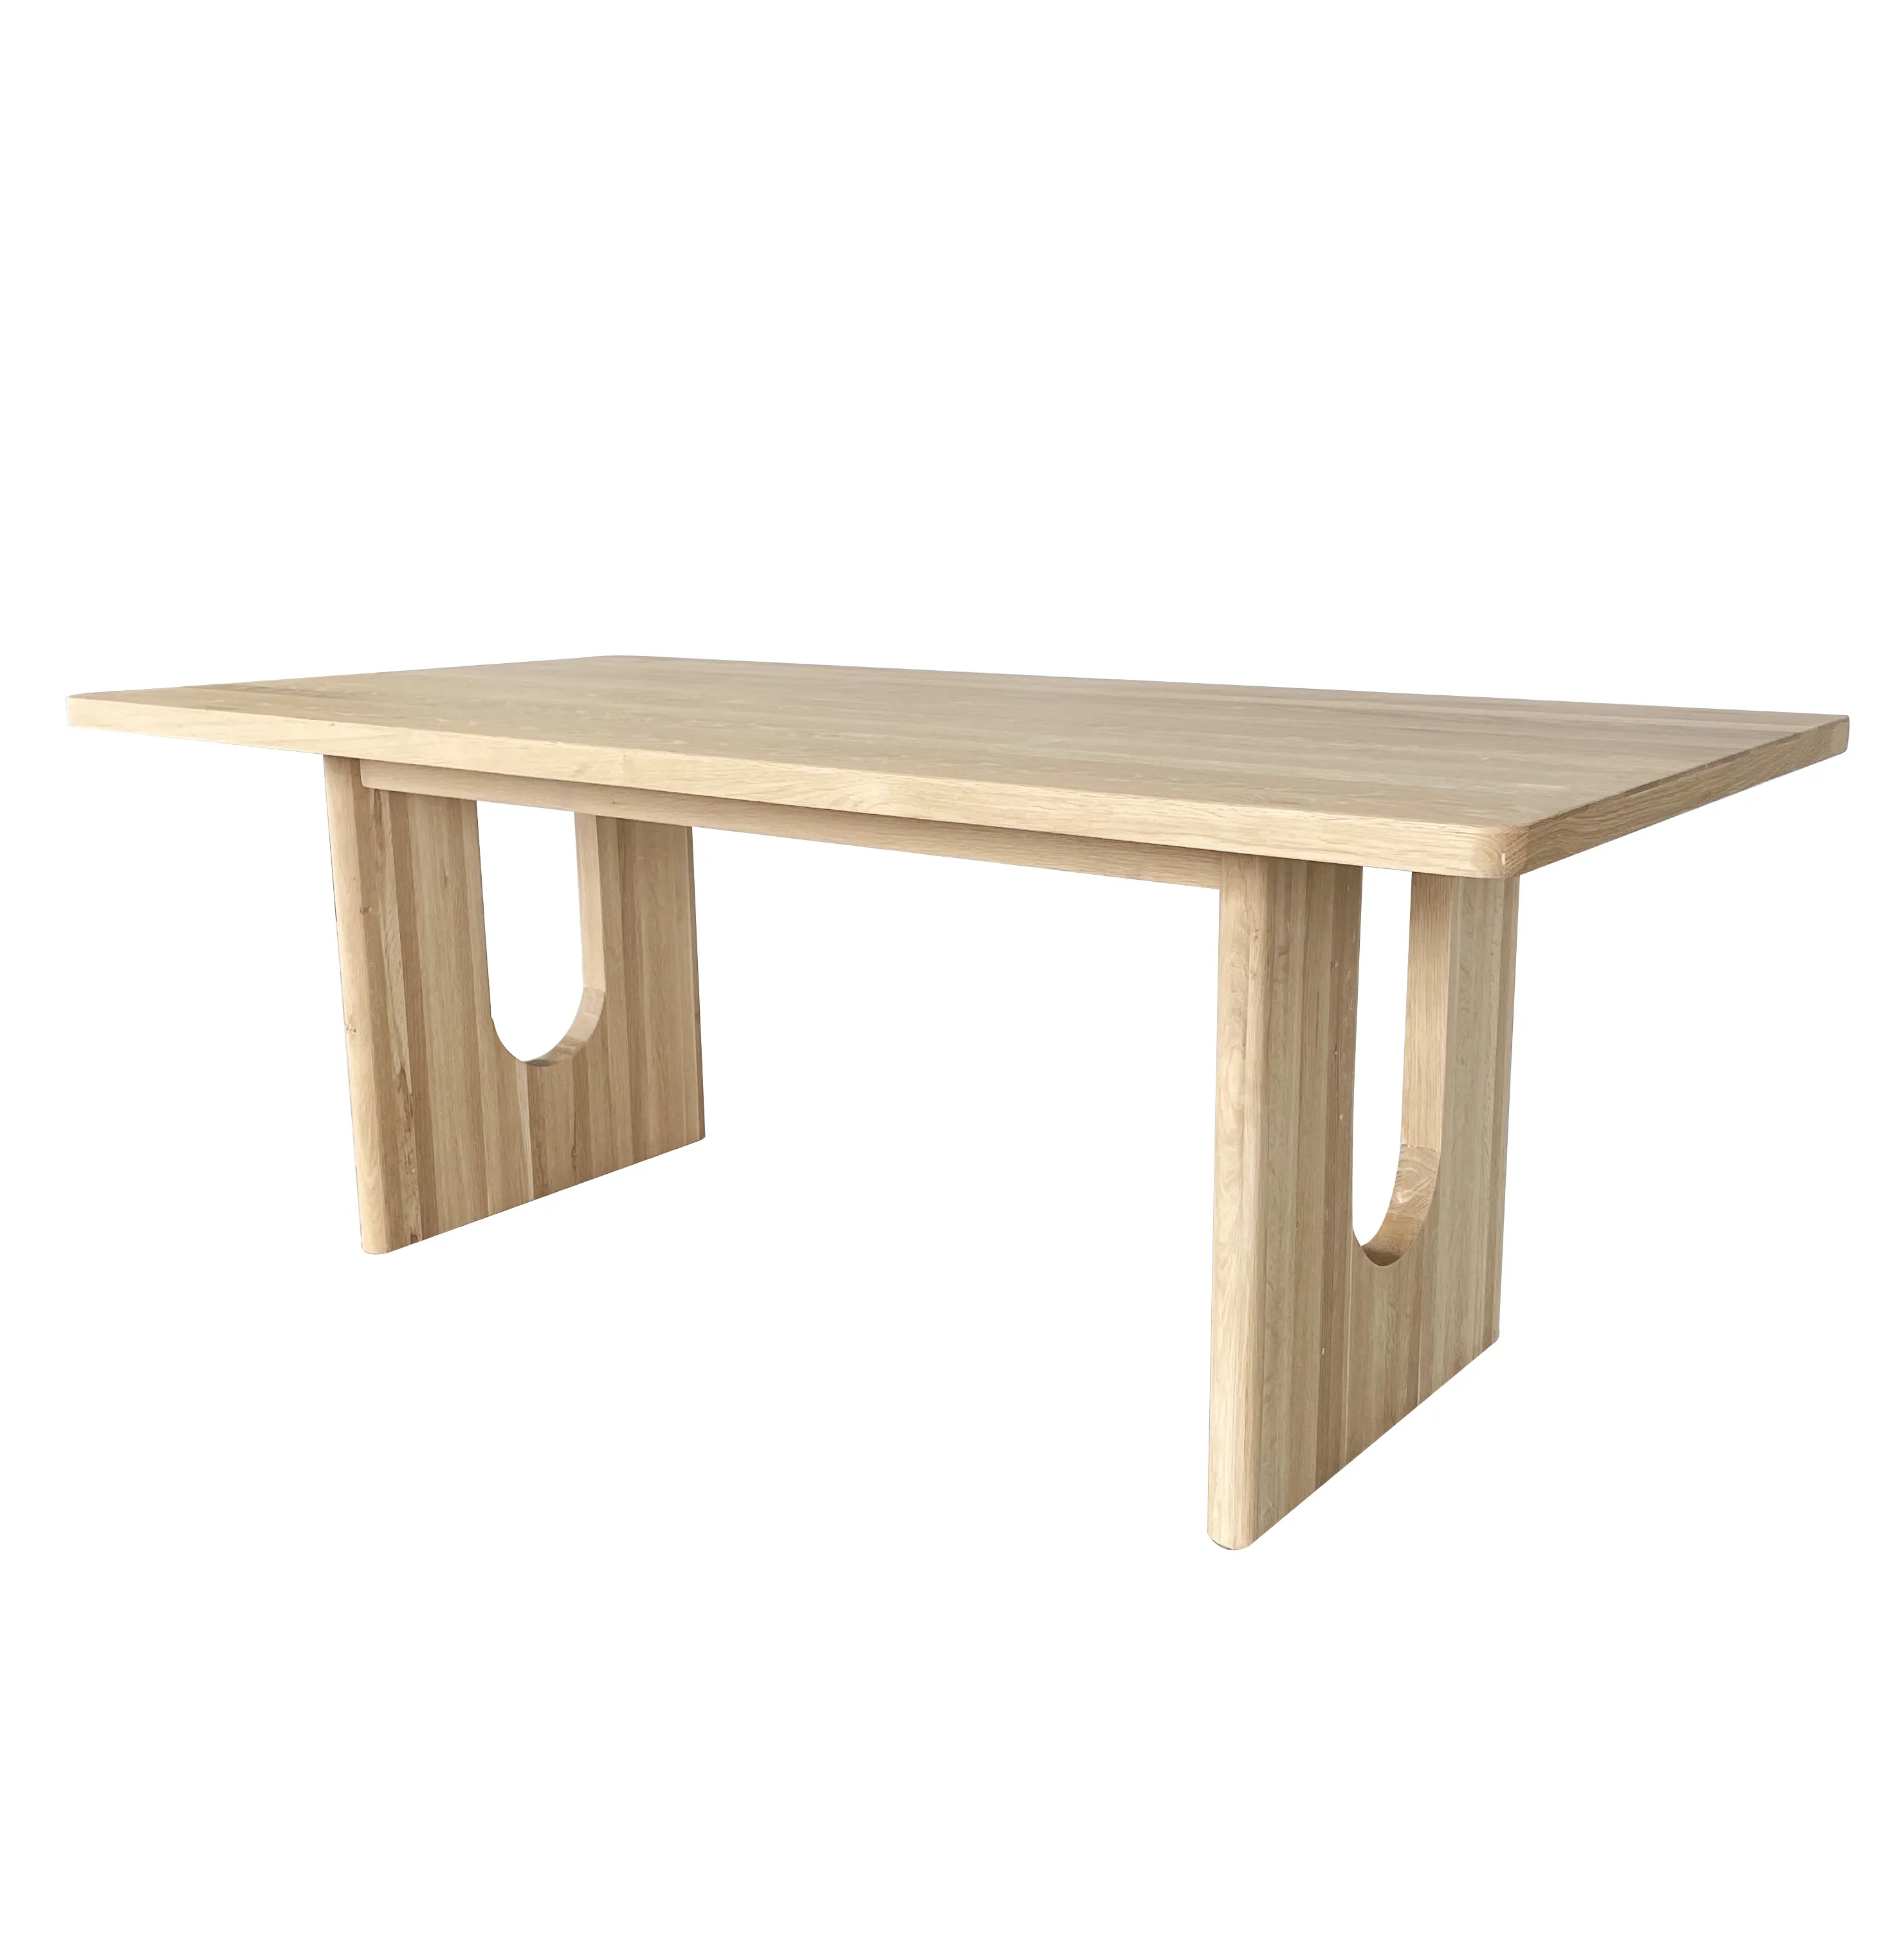 Dining room furniture nordic dinner table minimalist solid wood square dining table for 8